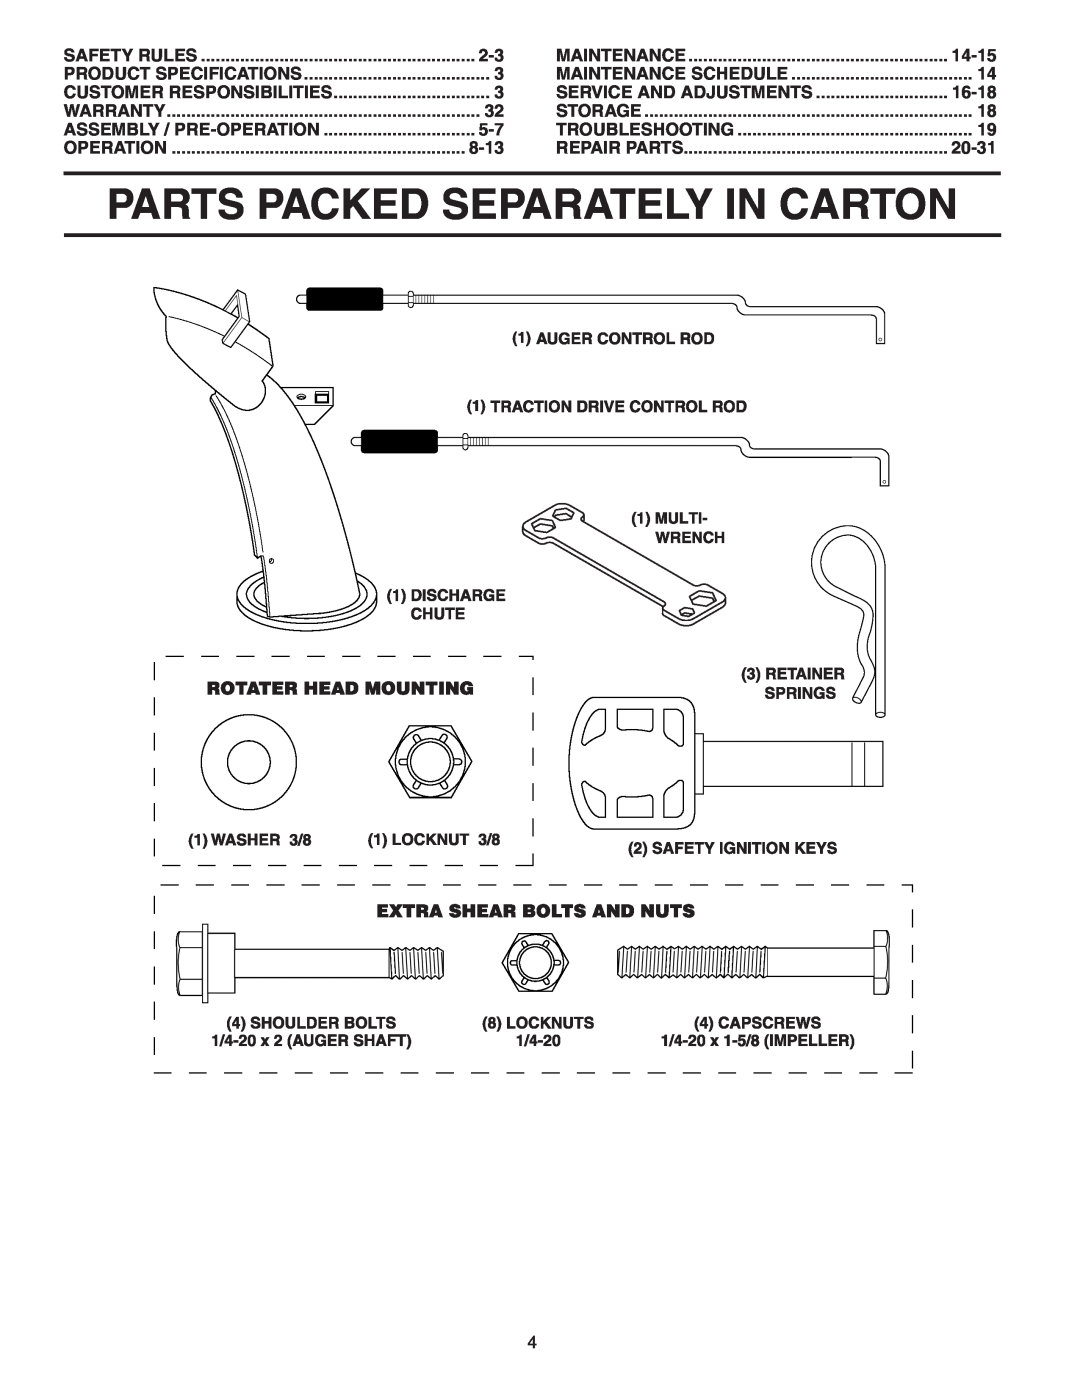 Poulan 187887 Parts Packed Separately In Carton, 8-13, 14-15, Service And Adjustments, 16-18, 20-31, Safety Rules, Storage 